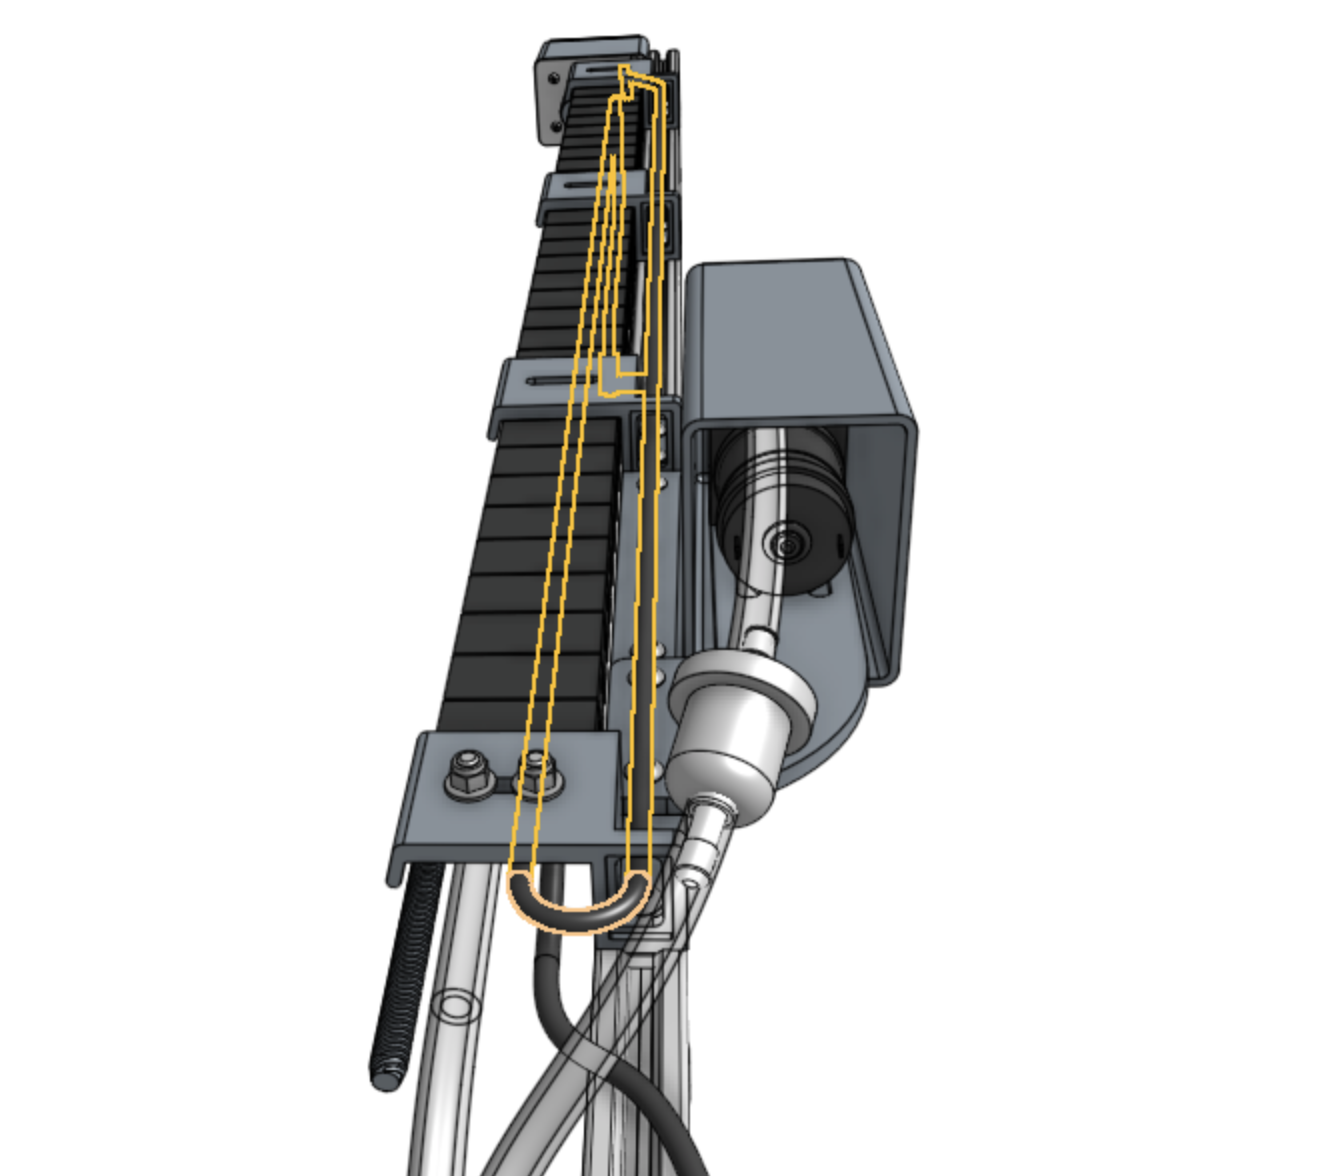 z axis with z motor cable highlighted bottom view